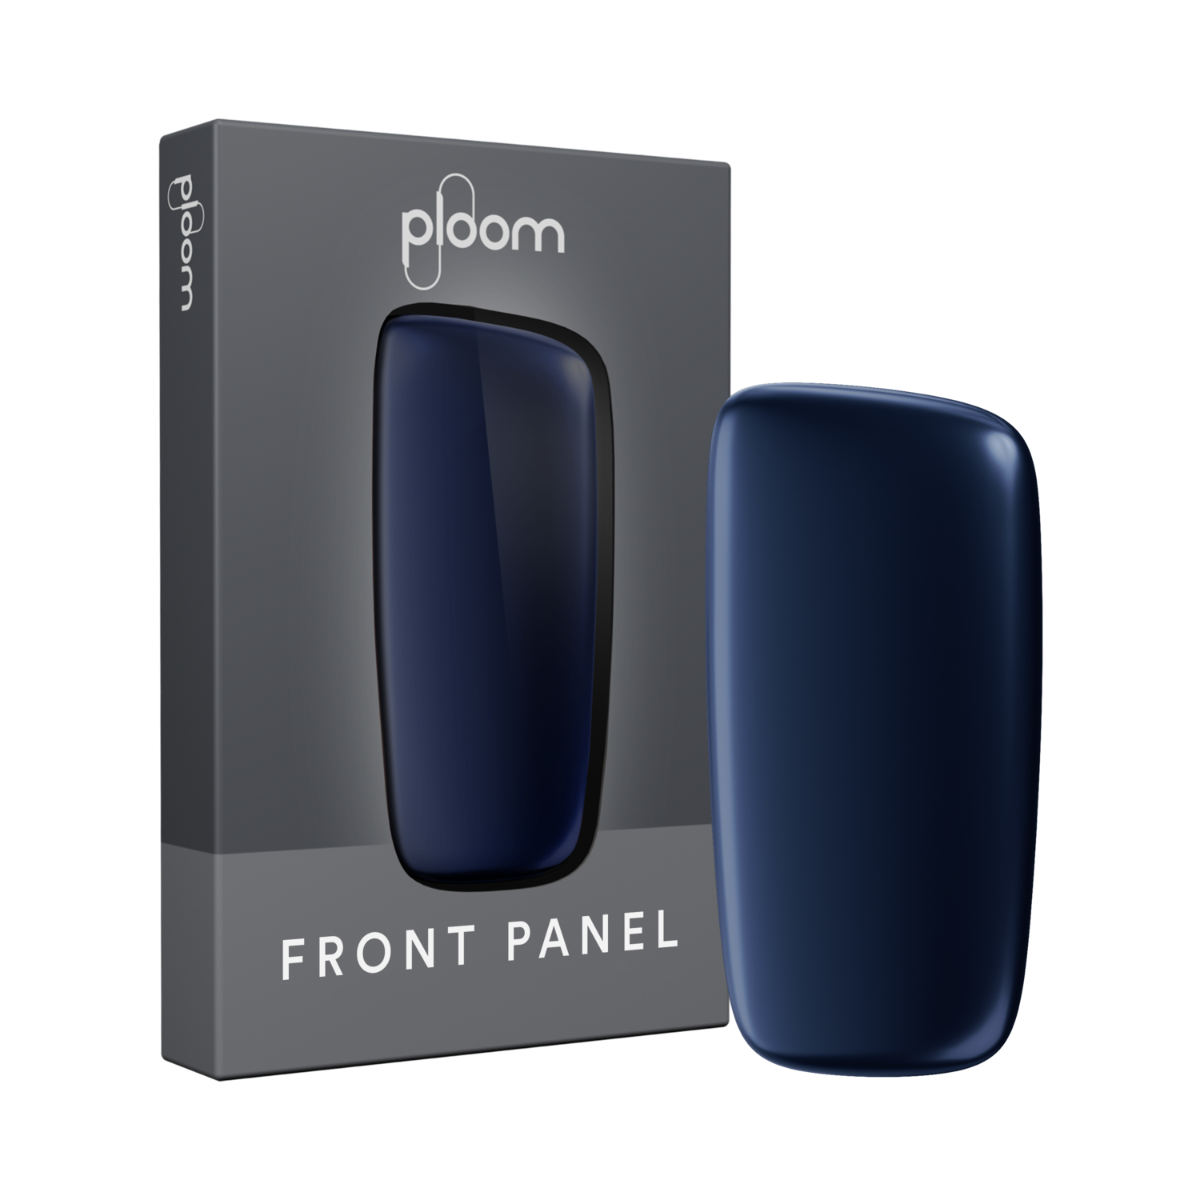 Ploom X Advanced front panel Navy Blue packaging with device
